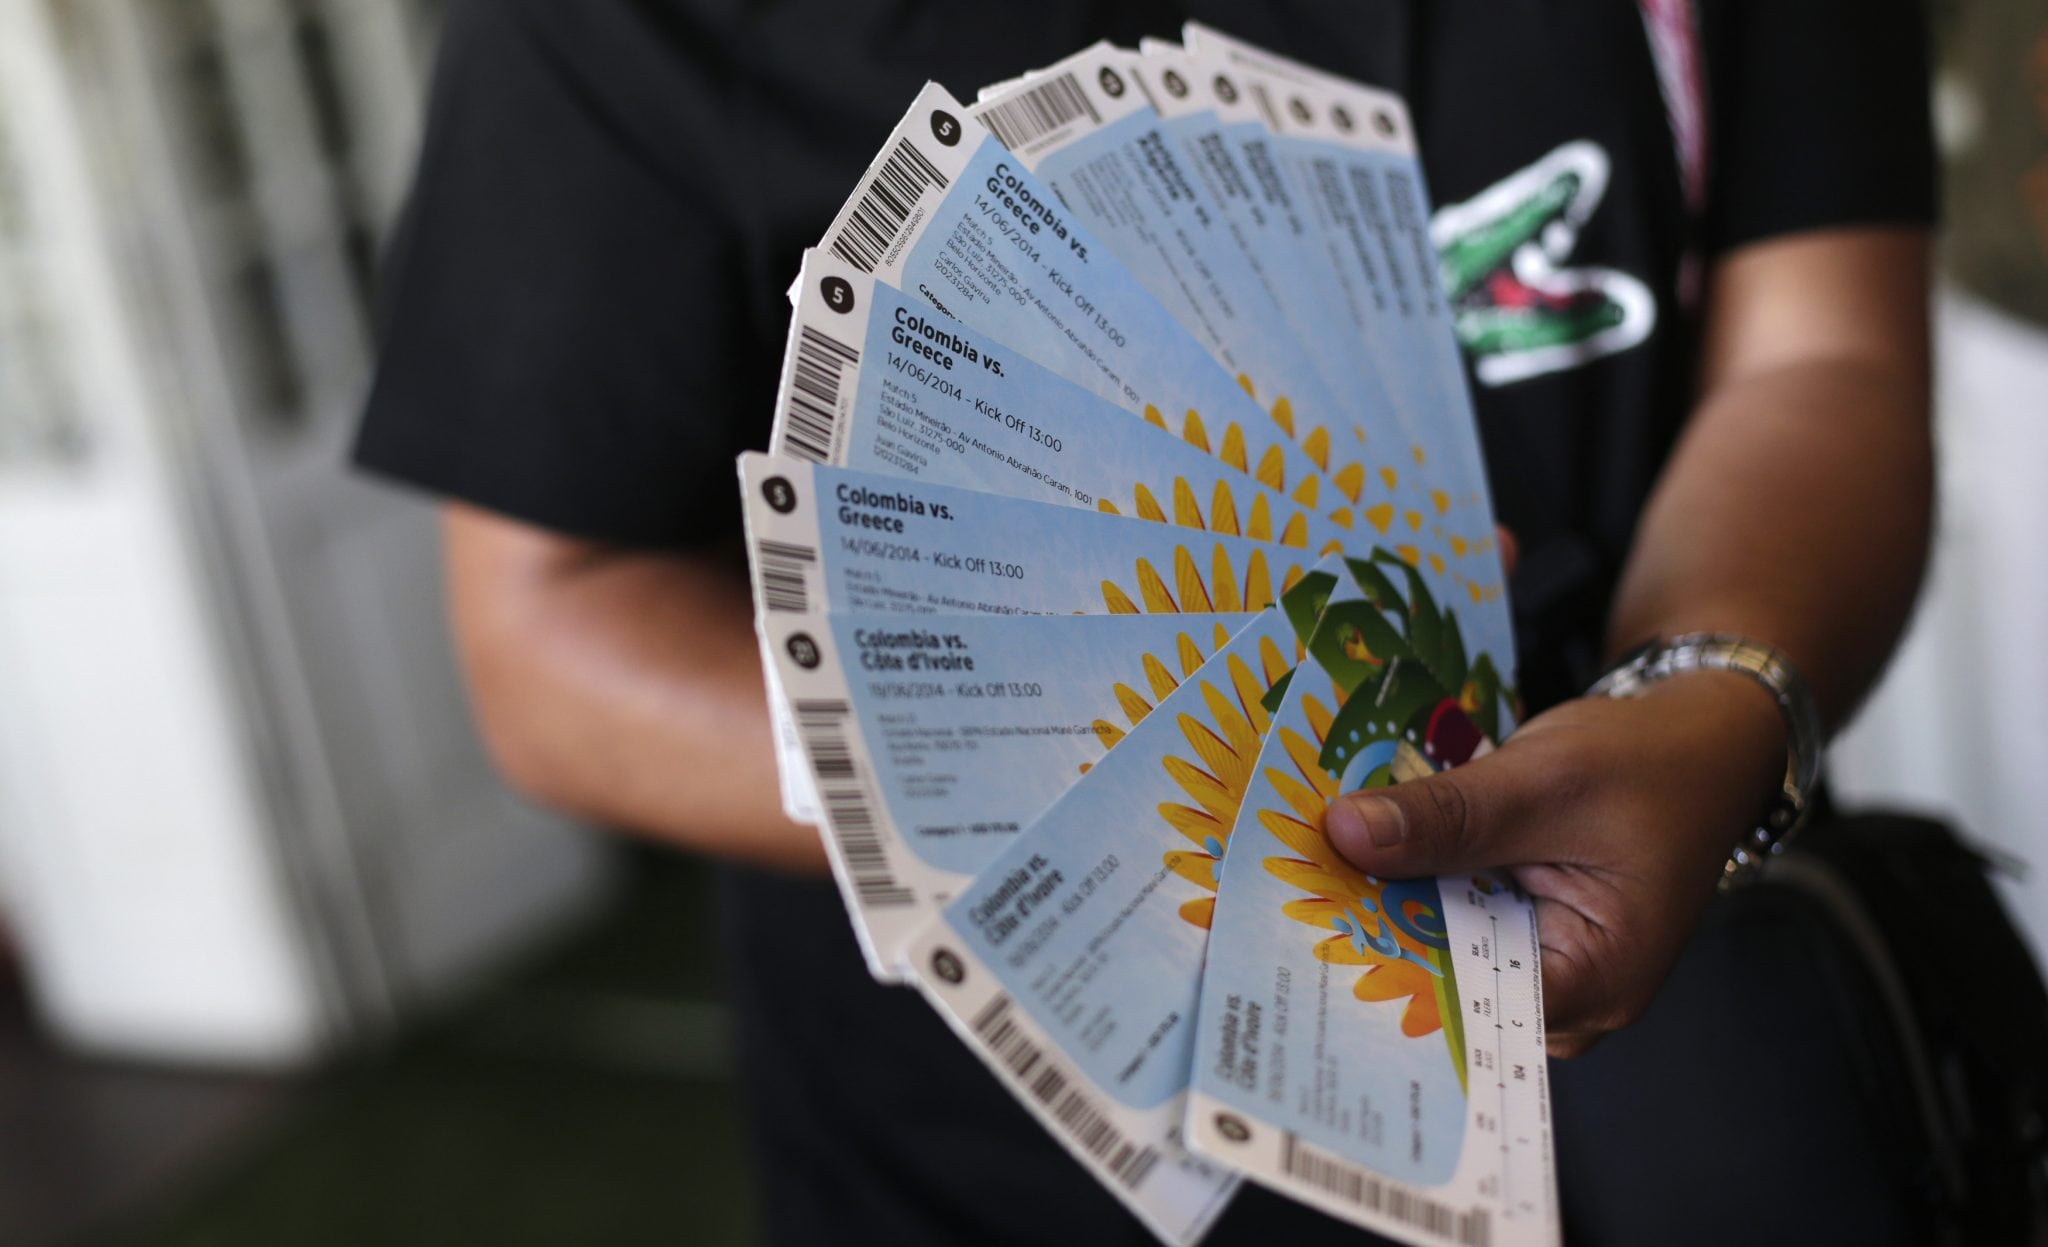 A Colombian fan displays his FIFA 2014 World Cup tickets for the match between Colombia and Greece, in Rio de Janeiro April 18, 2014.